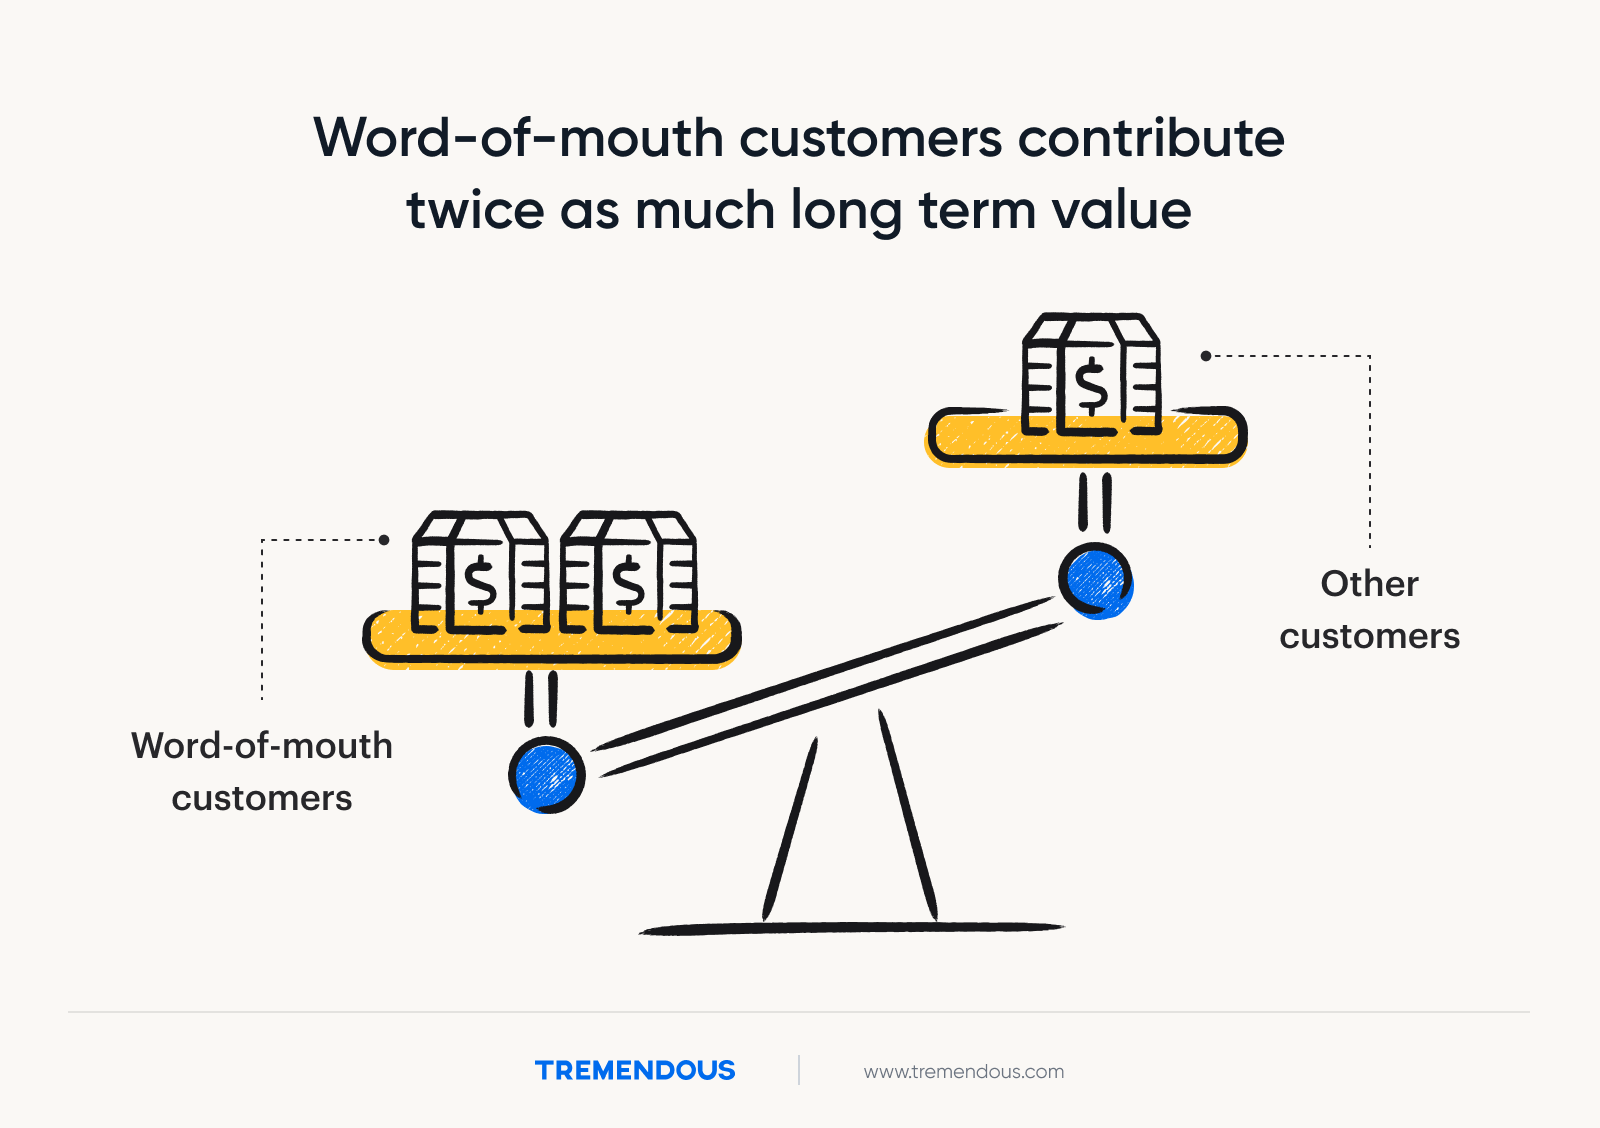 A see-saw representing that word of mouth customers have twice as much long term value as other customers.